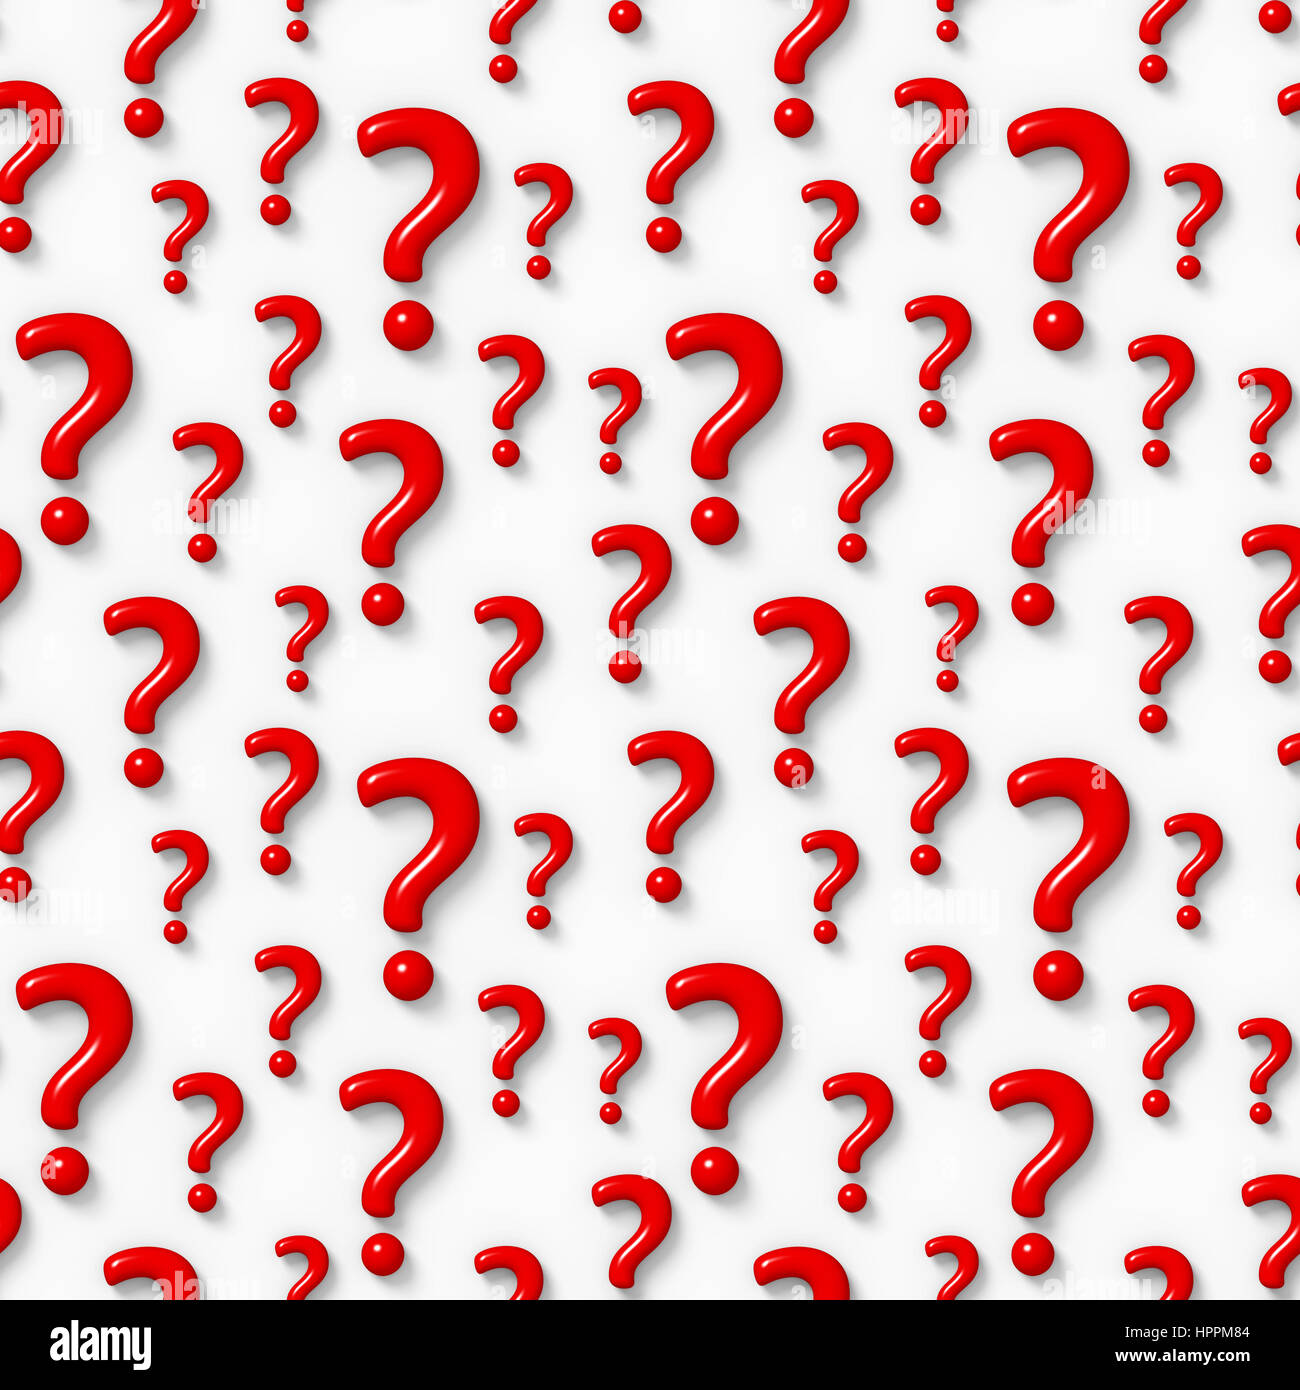 Question Mark With Red Background